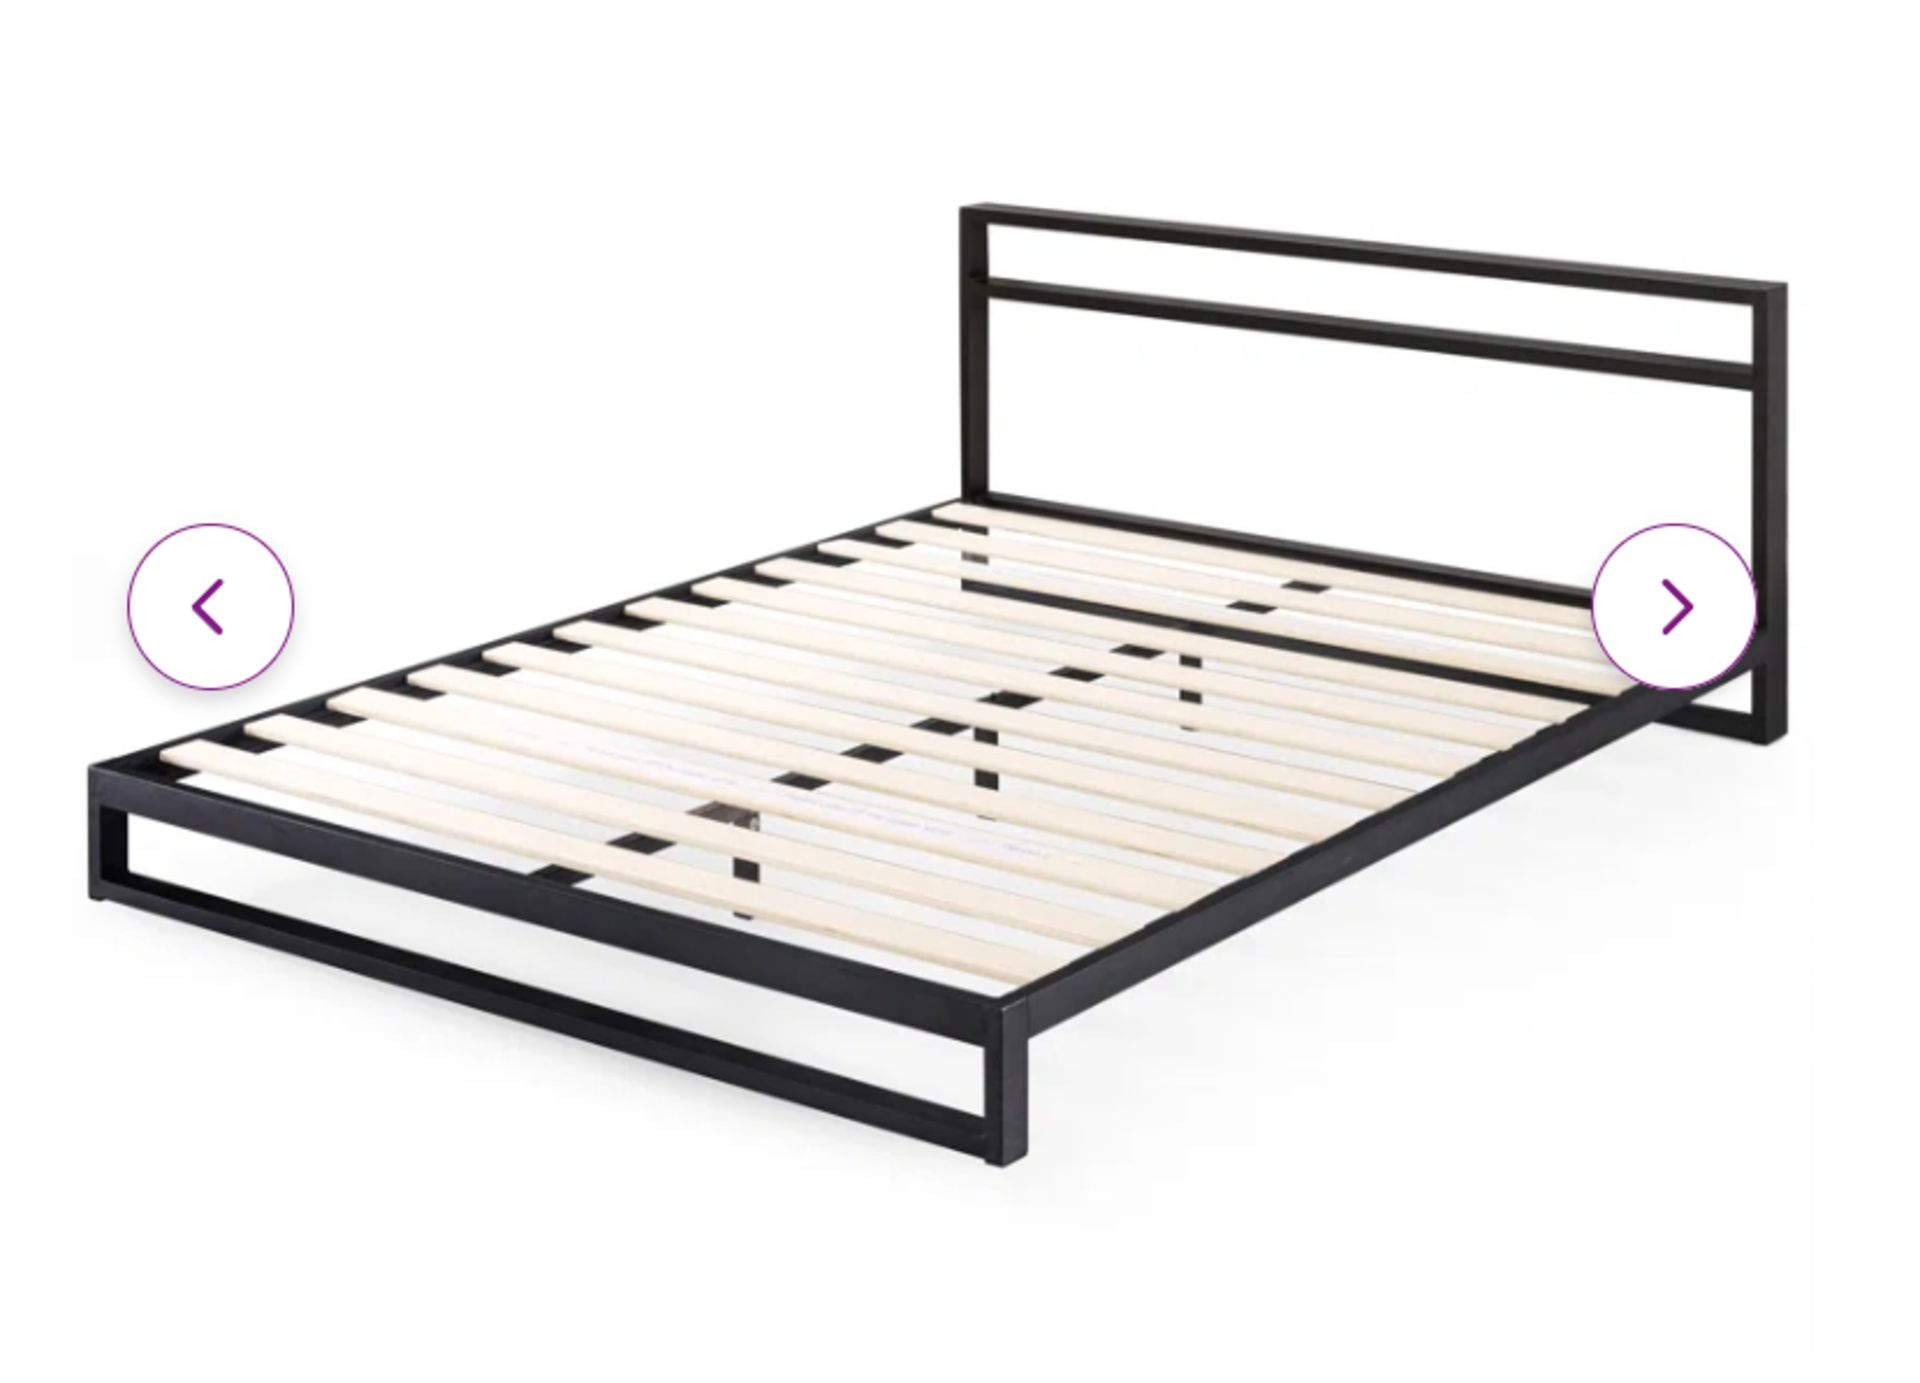 Rhoton Metal Bed. RRP £349.99. Super King. This minimalist bed frame offers the perfect basis for - Image 2 of 2